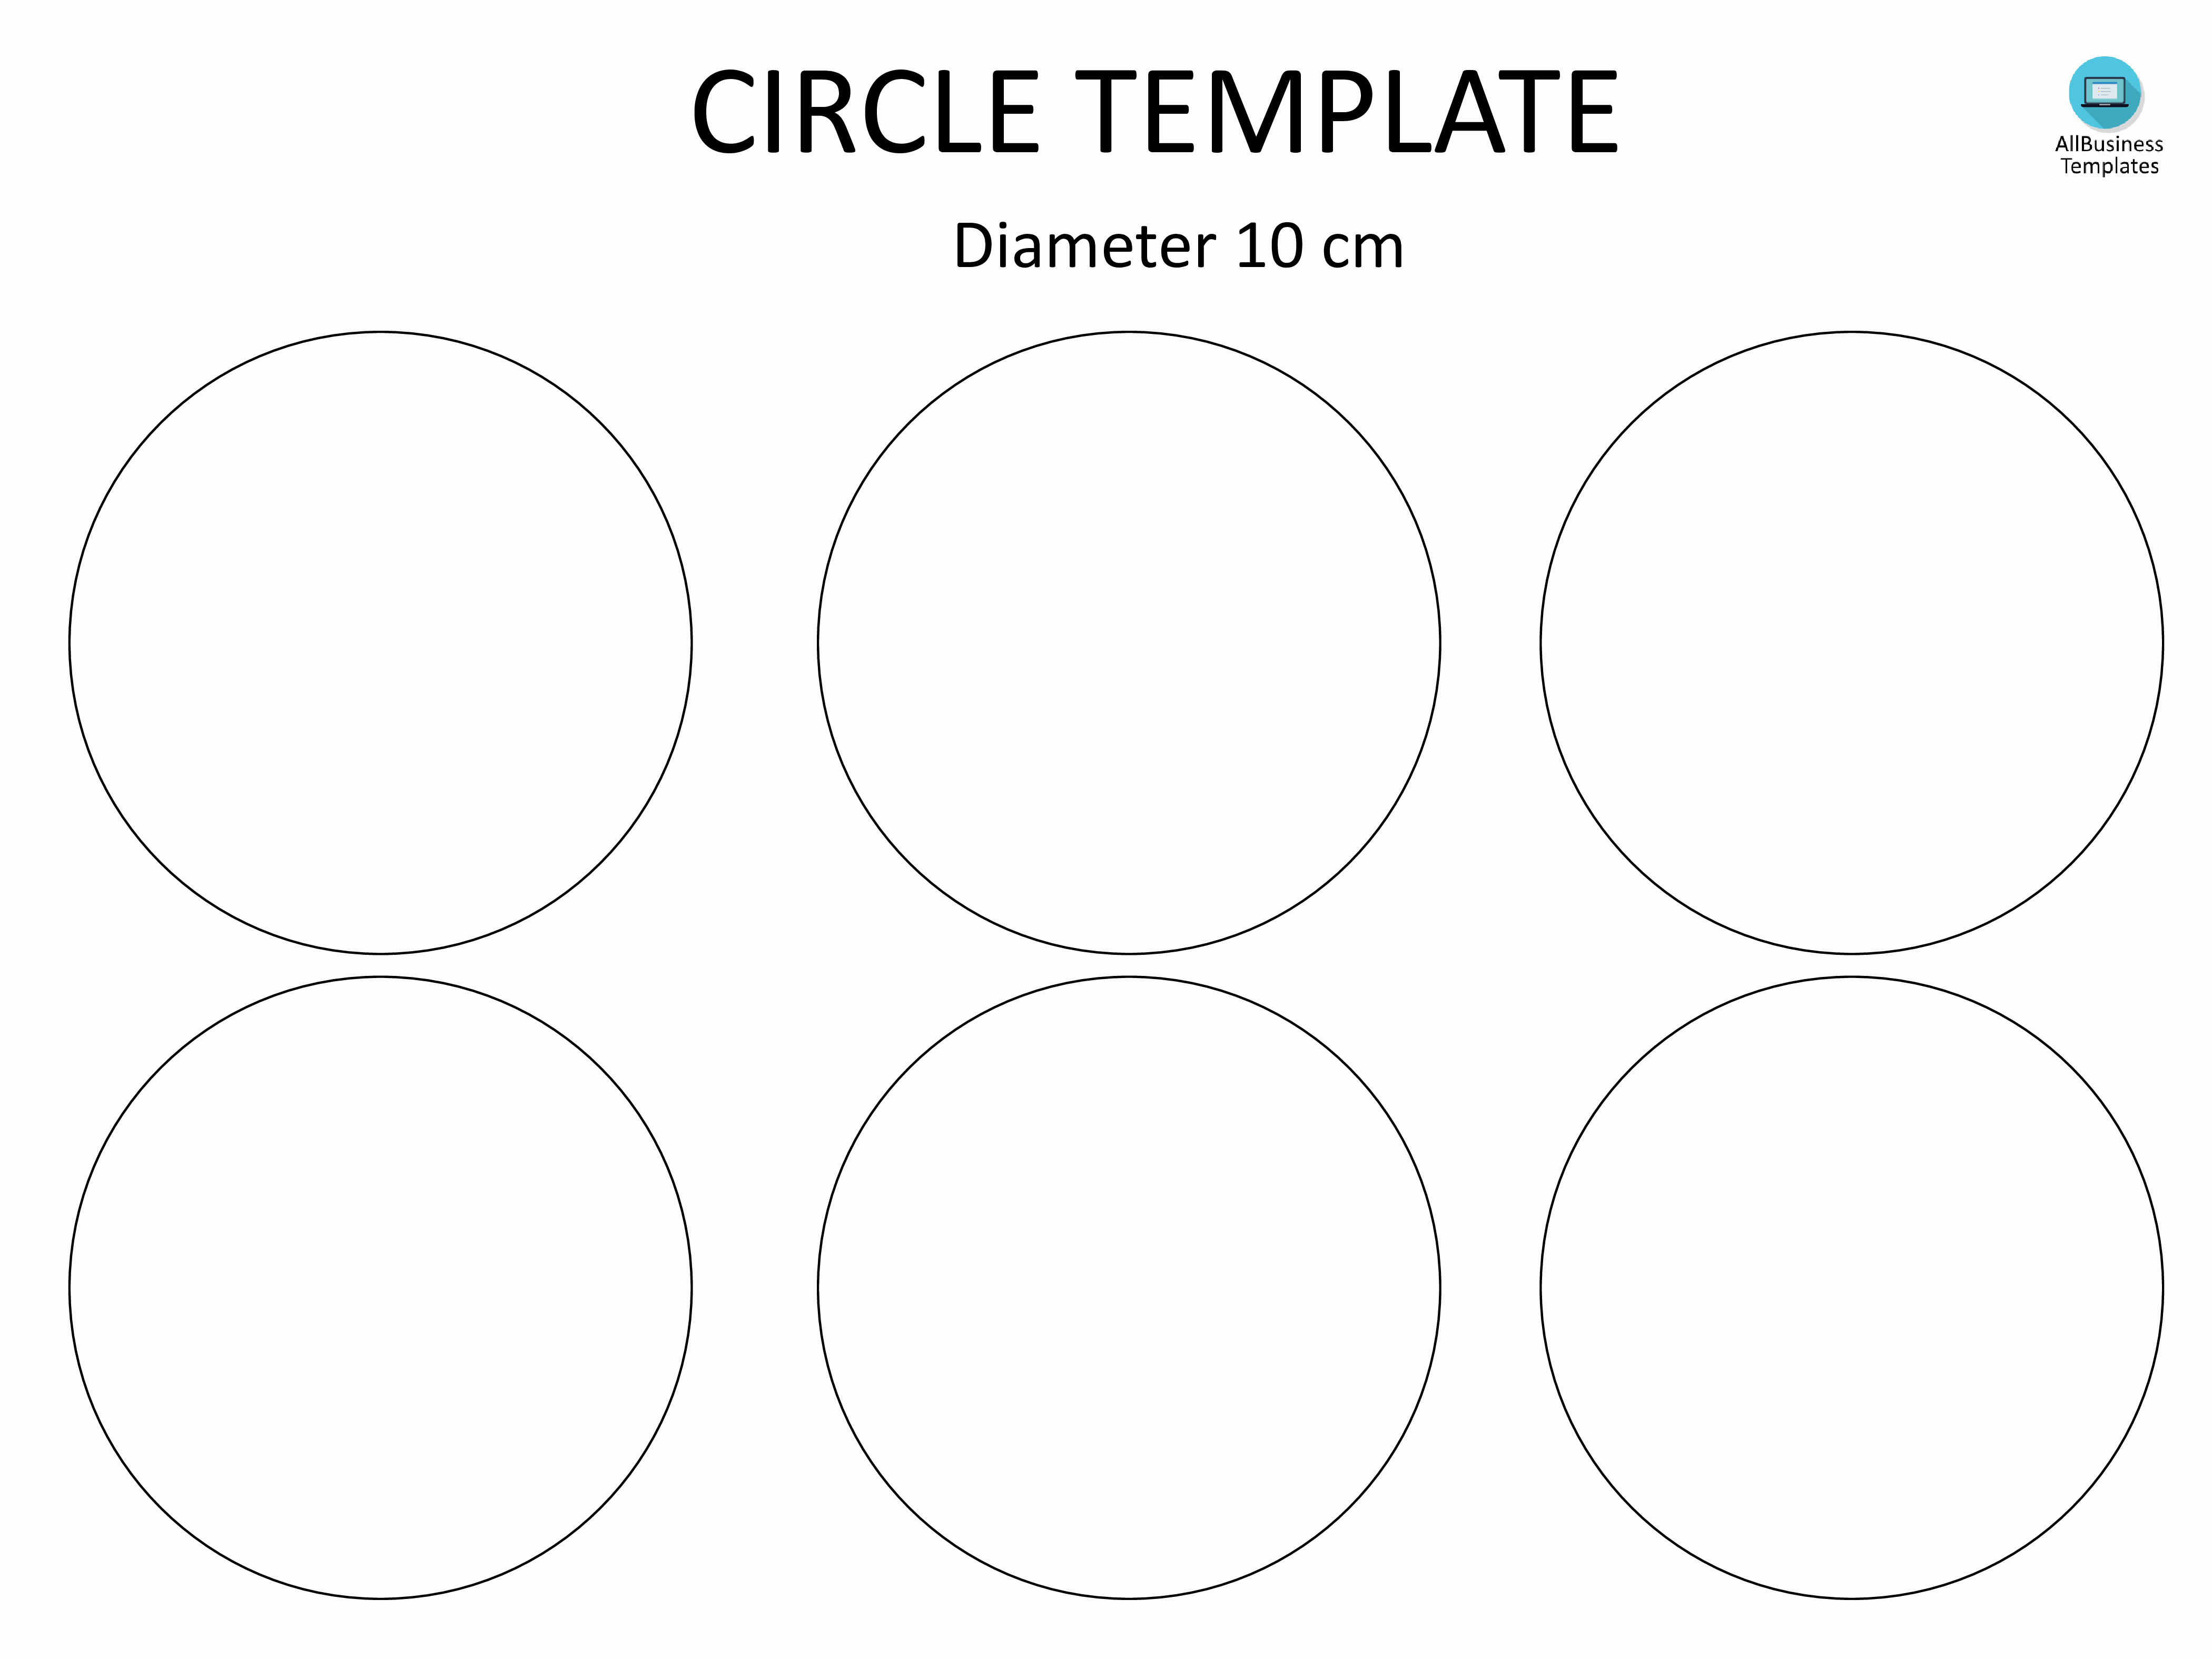 3 Inch Diameter Circle Template Best Of Free Circle Template with 10cm Diameter